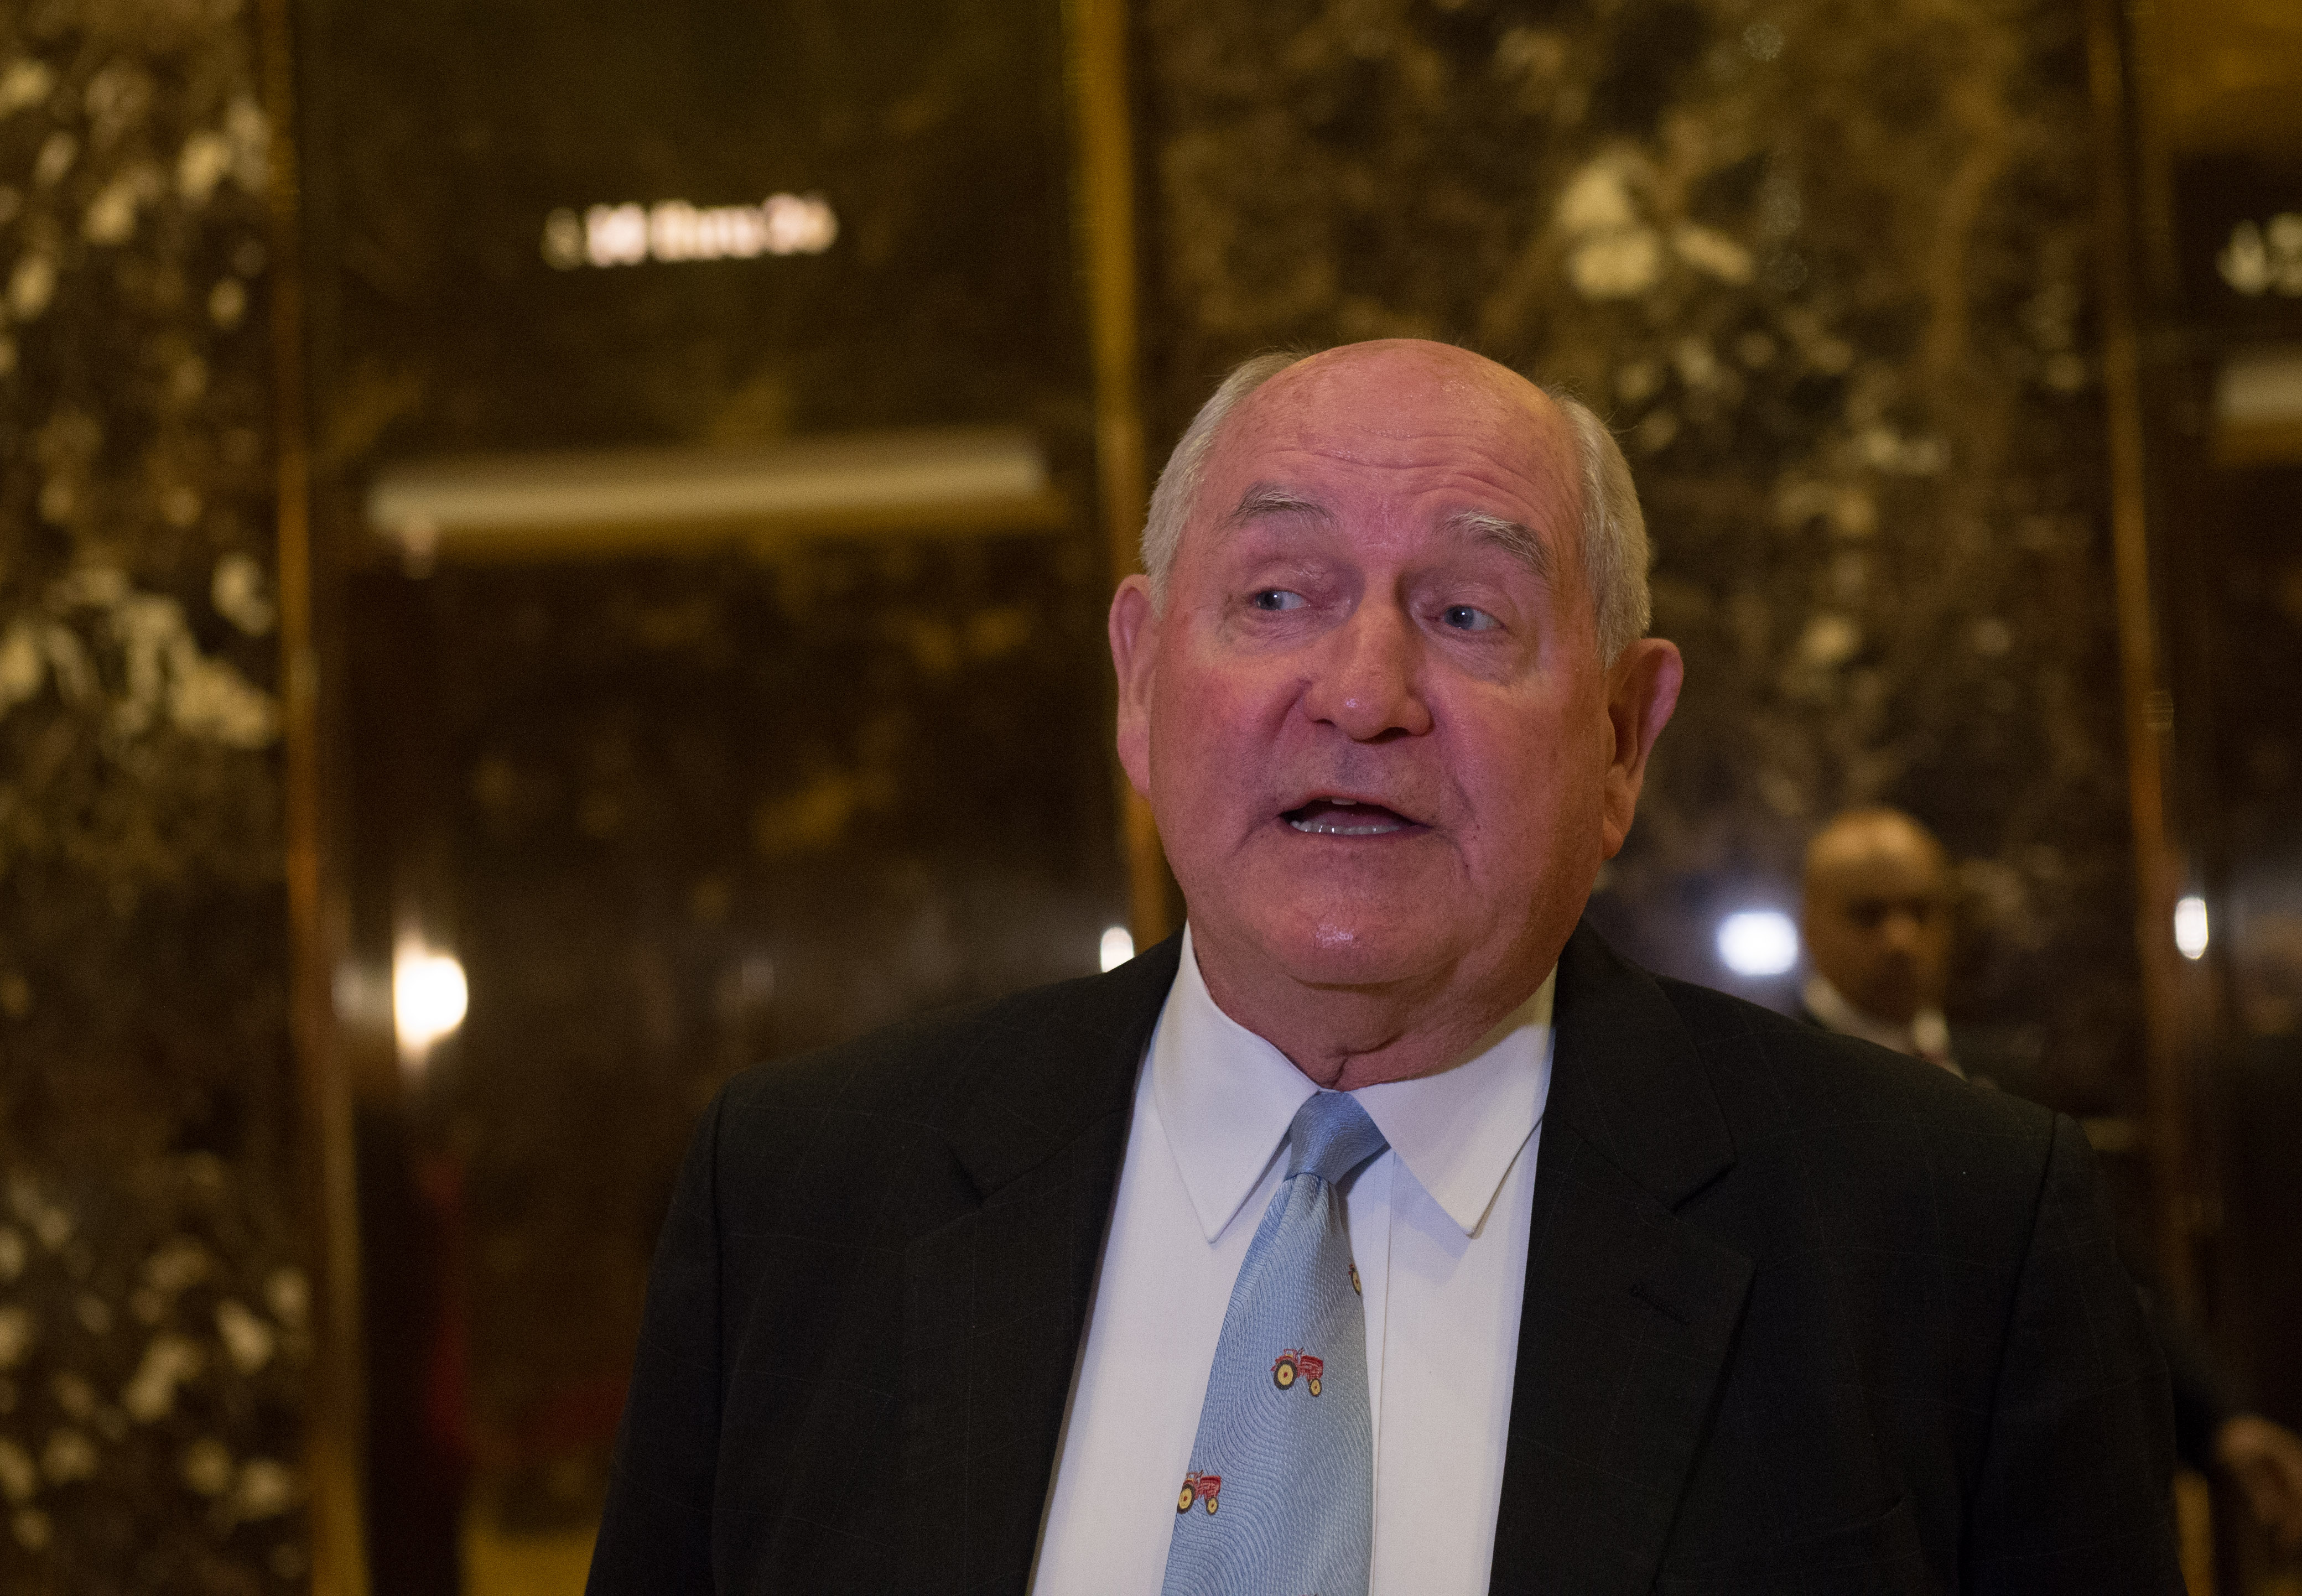 Former Georgia governor Sonny Perdue in the lobby of Trump Tower, in New York City on Nov. 30, 2016. (Bryan R. Smith—AFP/Getty Images)